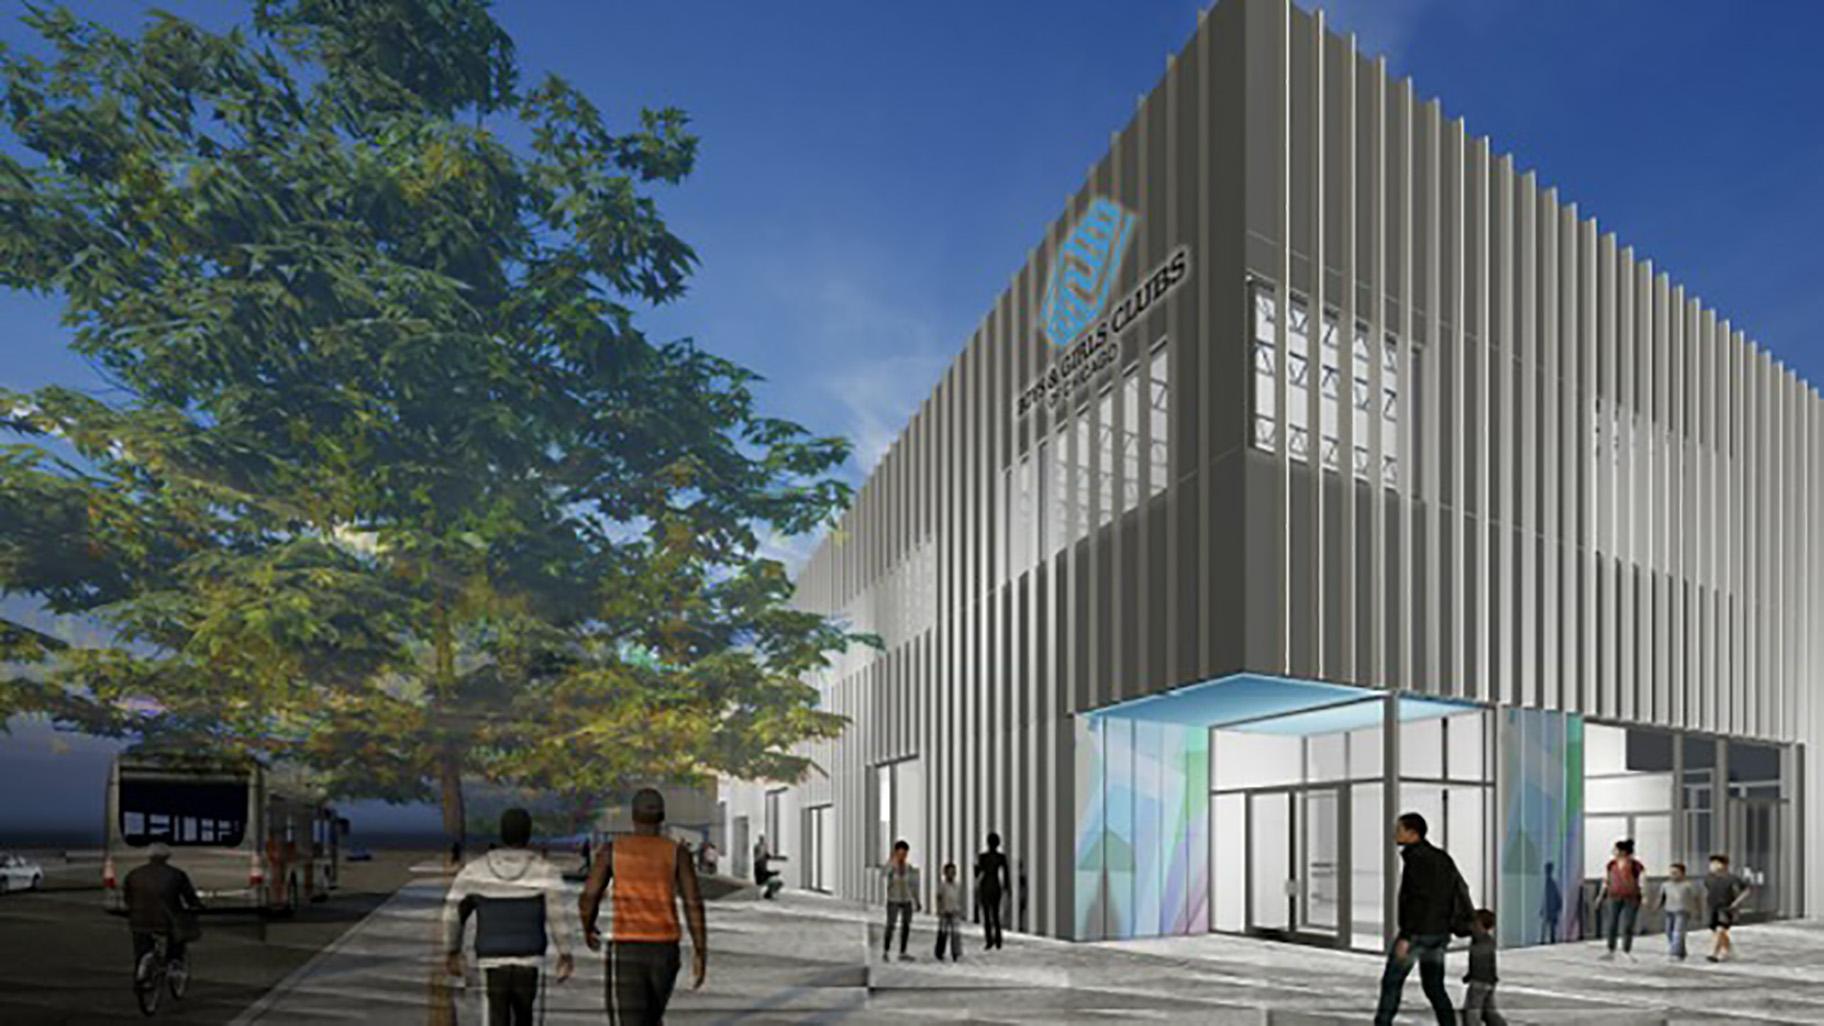 The Boys & Girls Club set to be built as part of the new police and fire training facility is the first new club to be built in Chicago in a generation, officials said. (Credit City of Chicago)